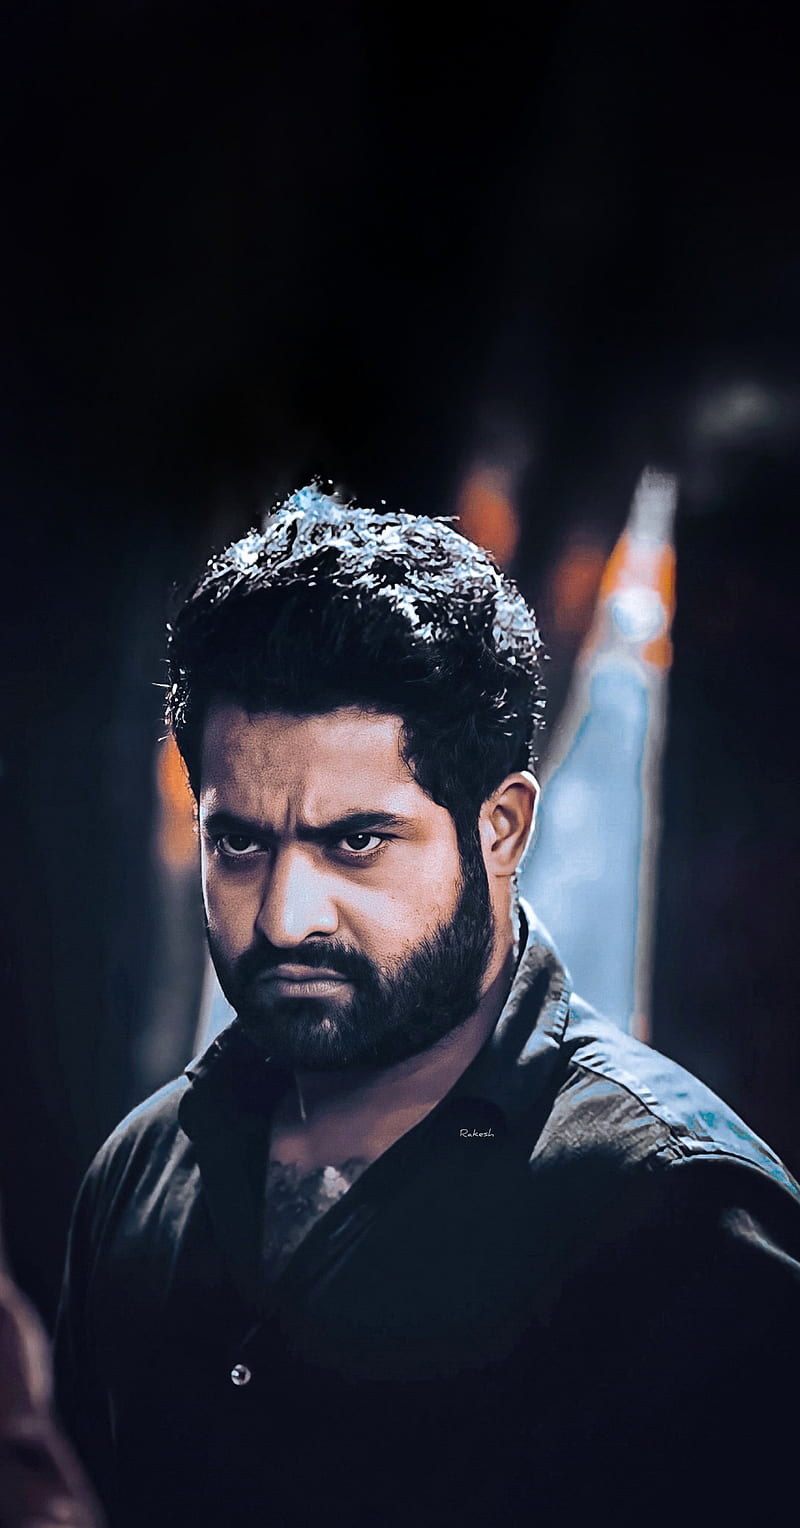 Incredible Compilation of Over 999+ High-Definition ntr Images – Stunning Full 4K ntr Images